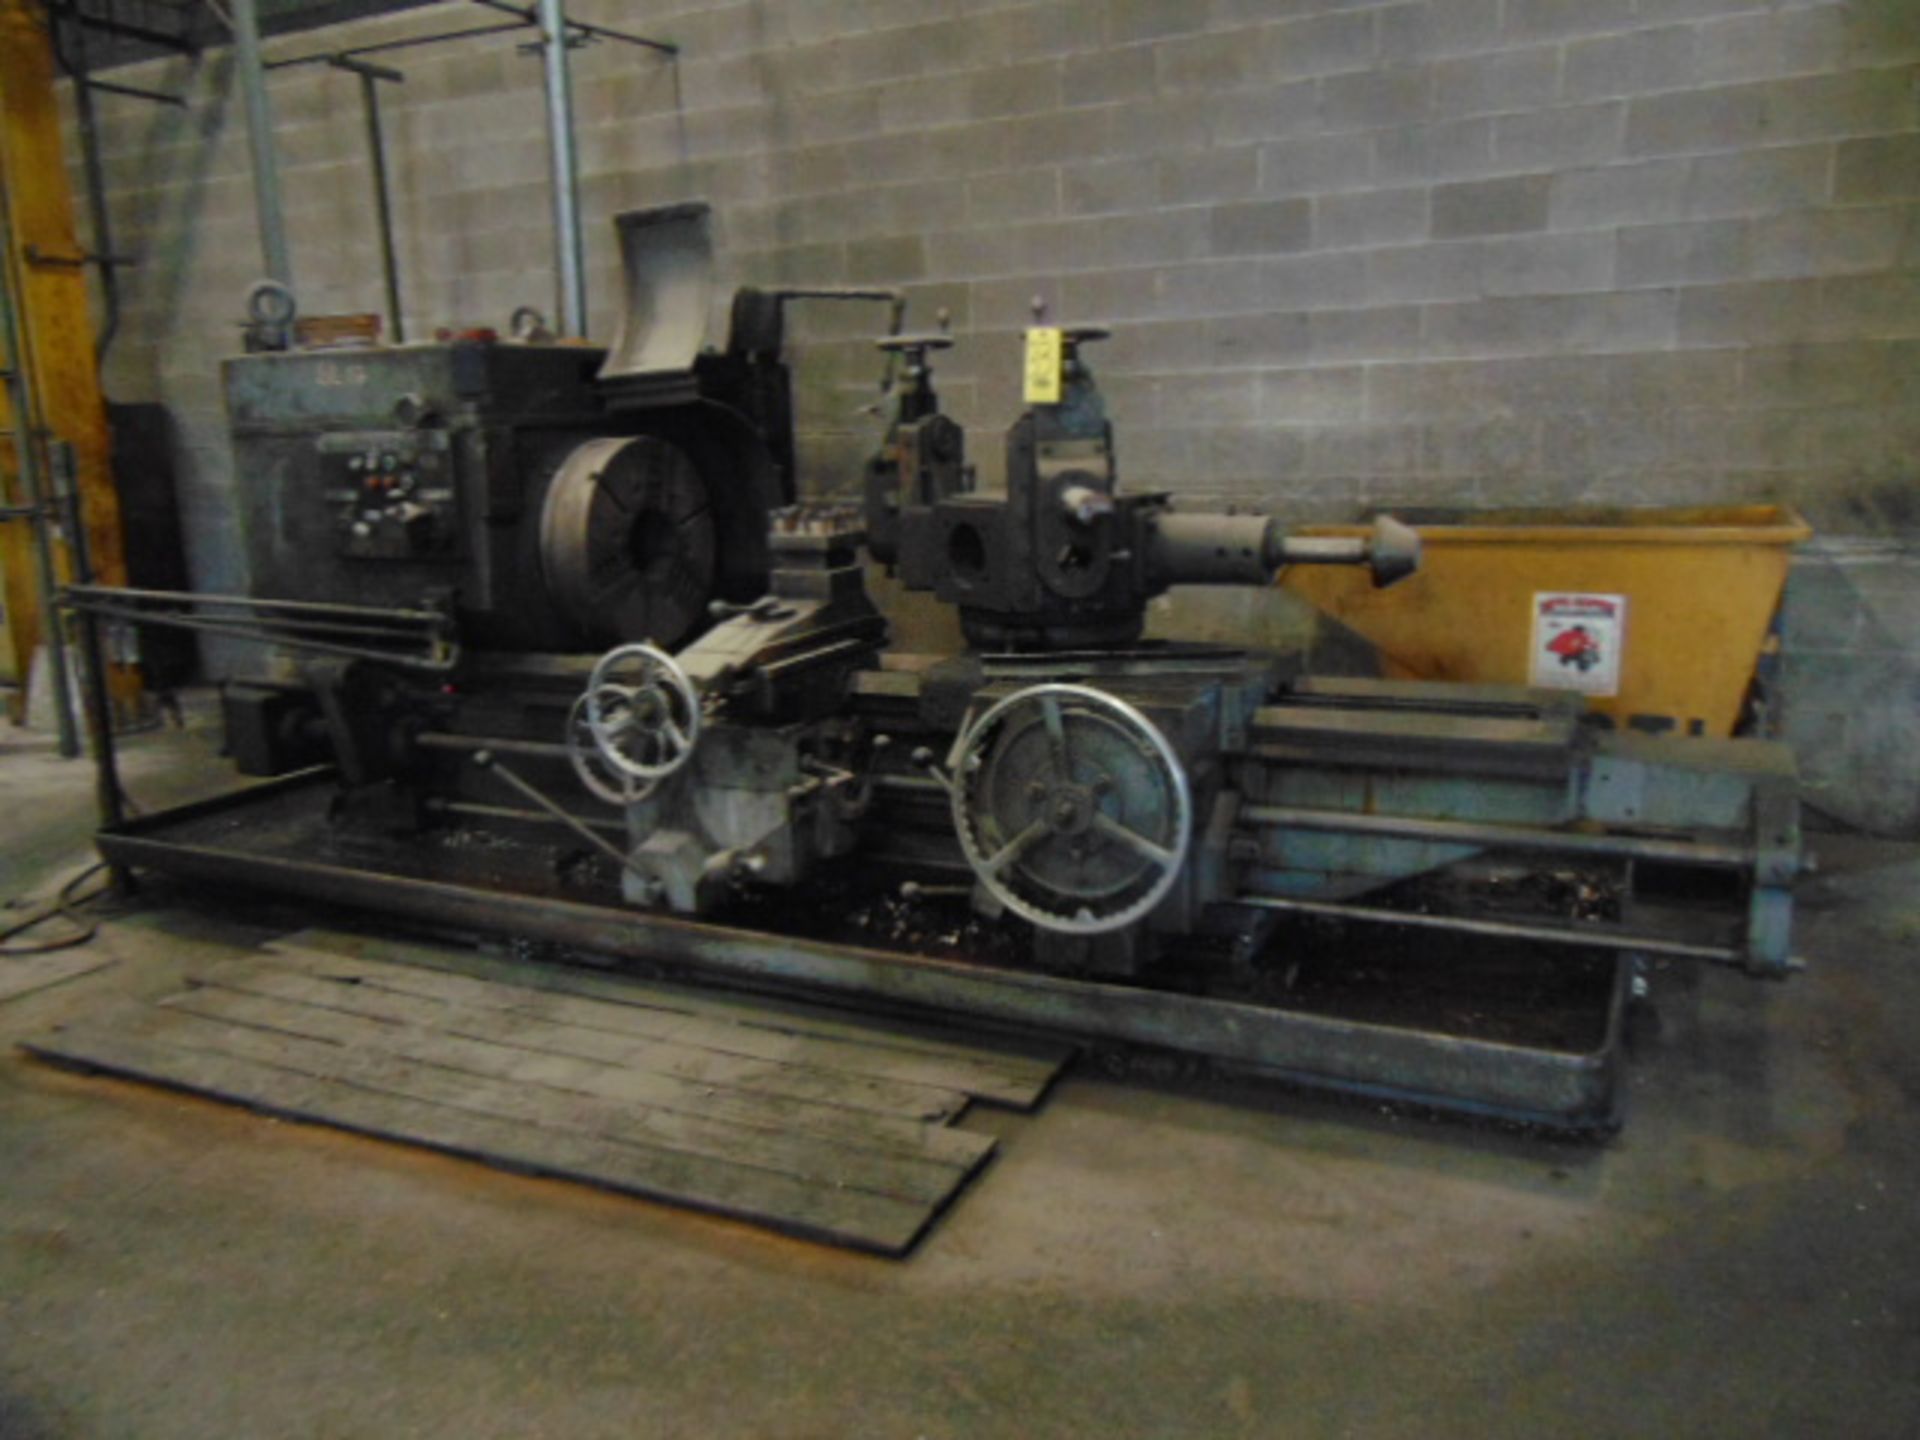 TURRET LATHE, WARNER & SWASEY MDL. 4A M-3350, S/N 1546007(Located at: Machine Station, 601 McFarland